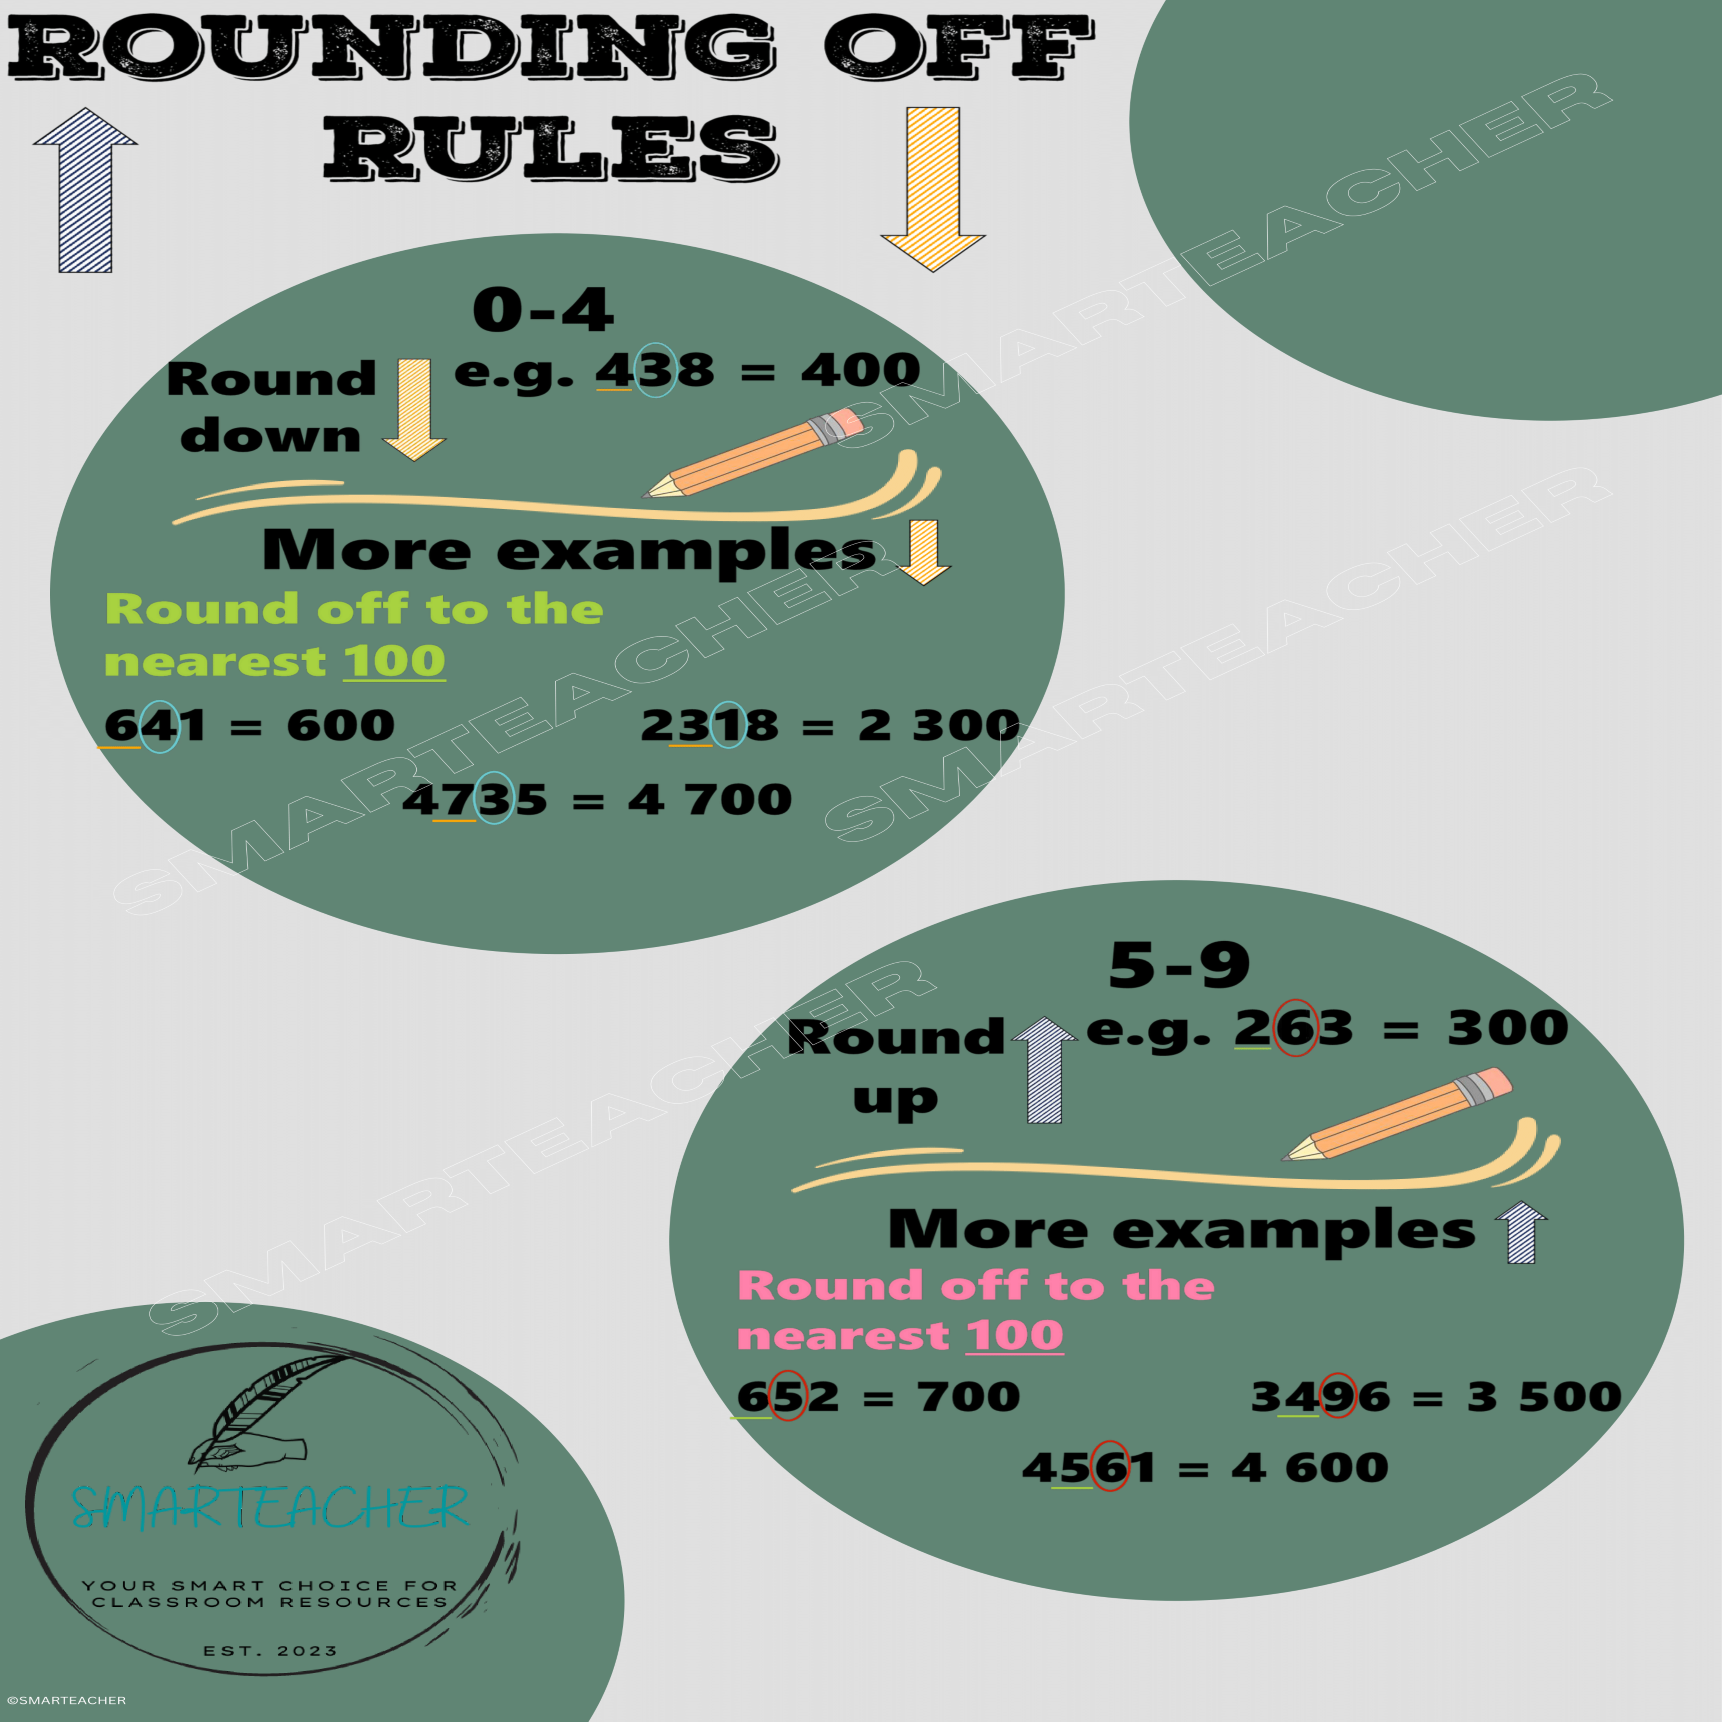 rounding-off-rules-a3-poster-teacha